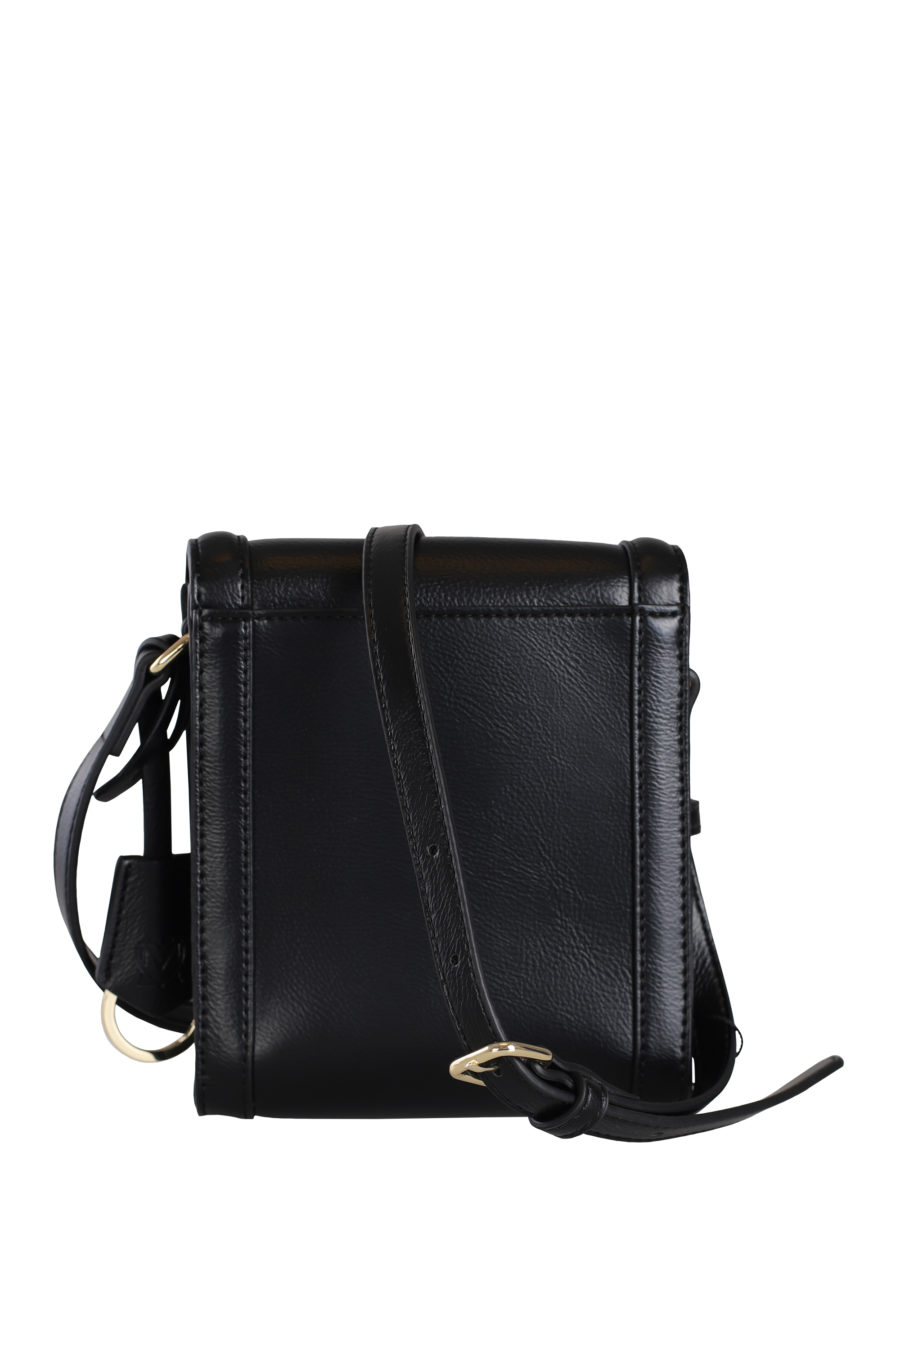 Small black bag with gold logo - IMG 9774